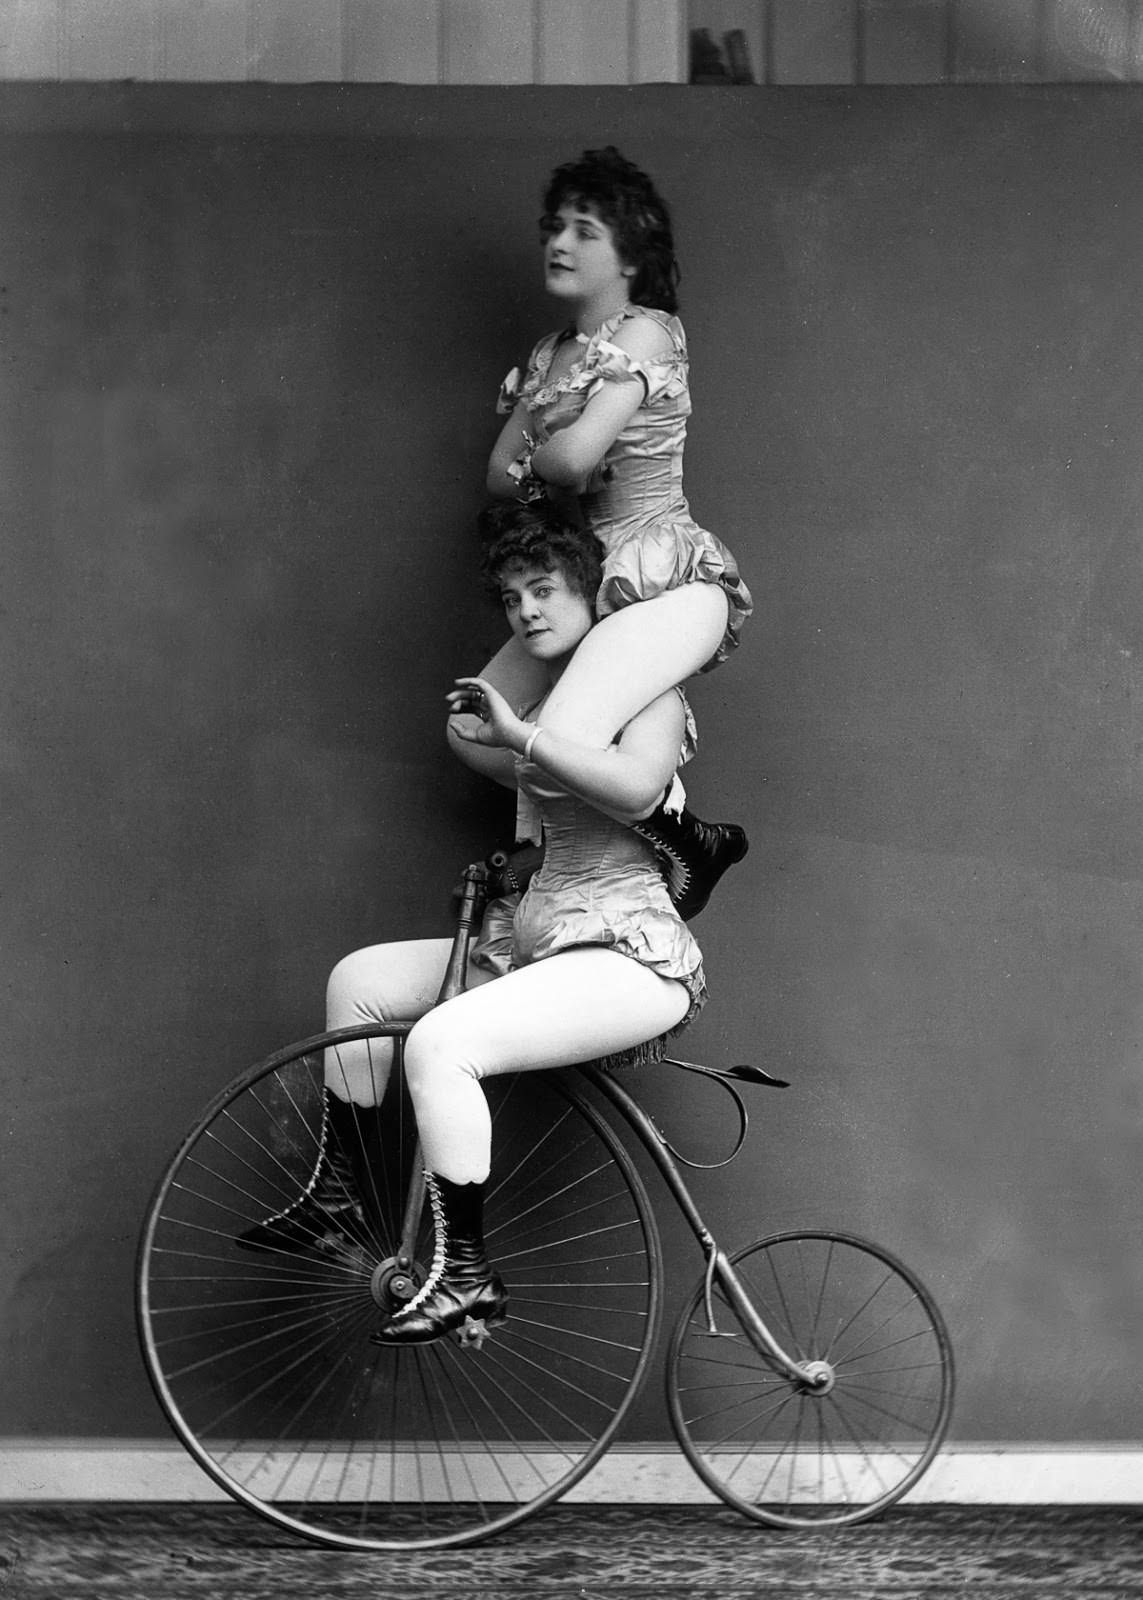 Victorian cyclists perform a balancing act on a penny-farthing, 1891.